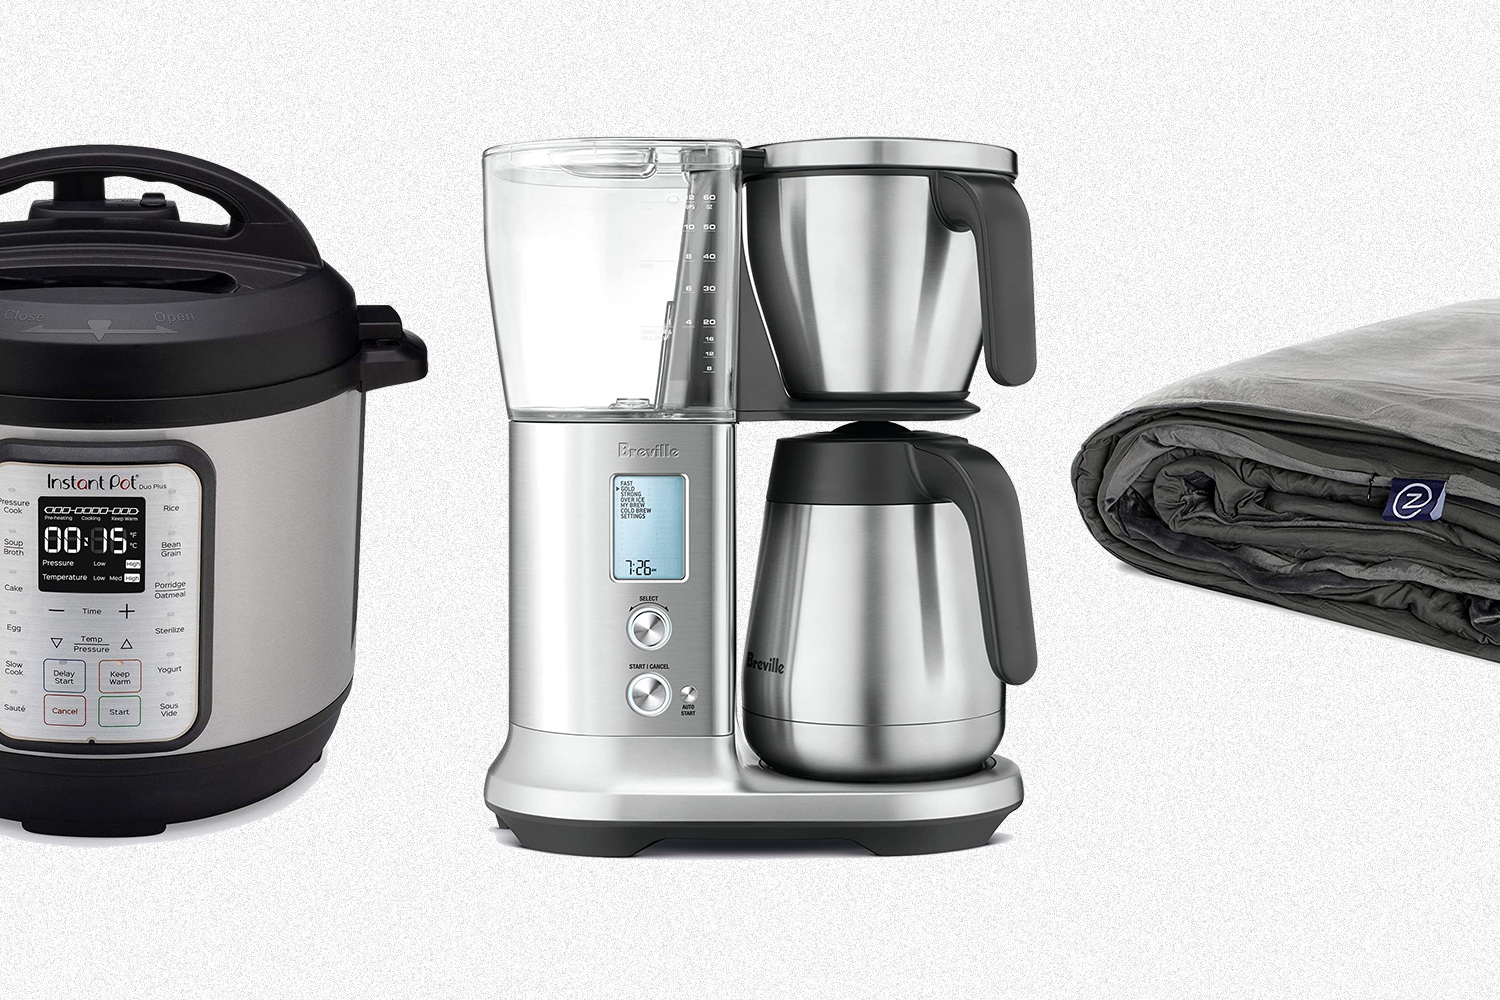 An Instant Pot, Breville coffee brewer and Gravity weighted blanket all on sale for Amazon Prime Day